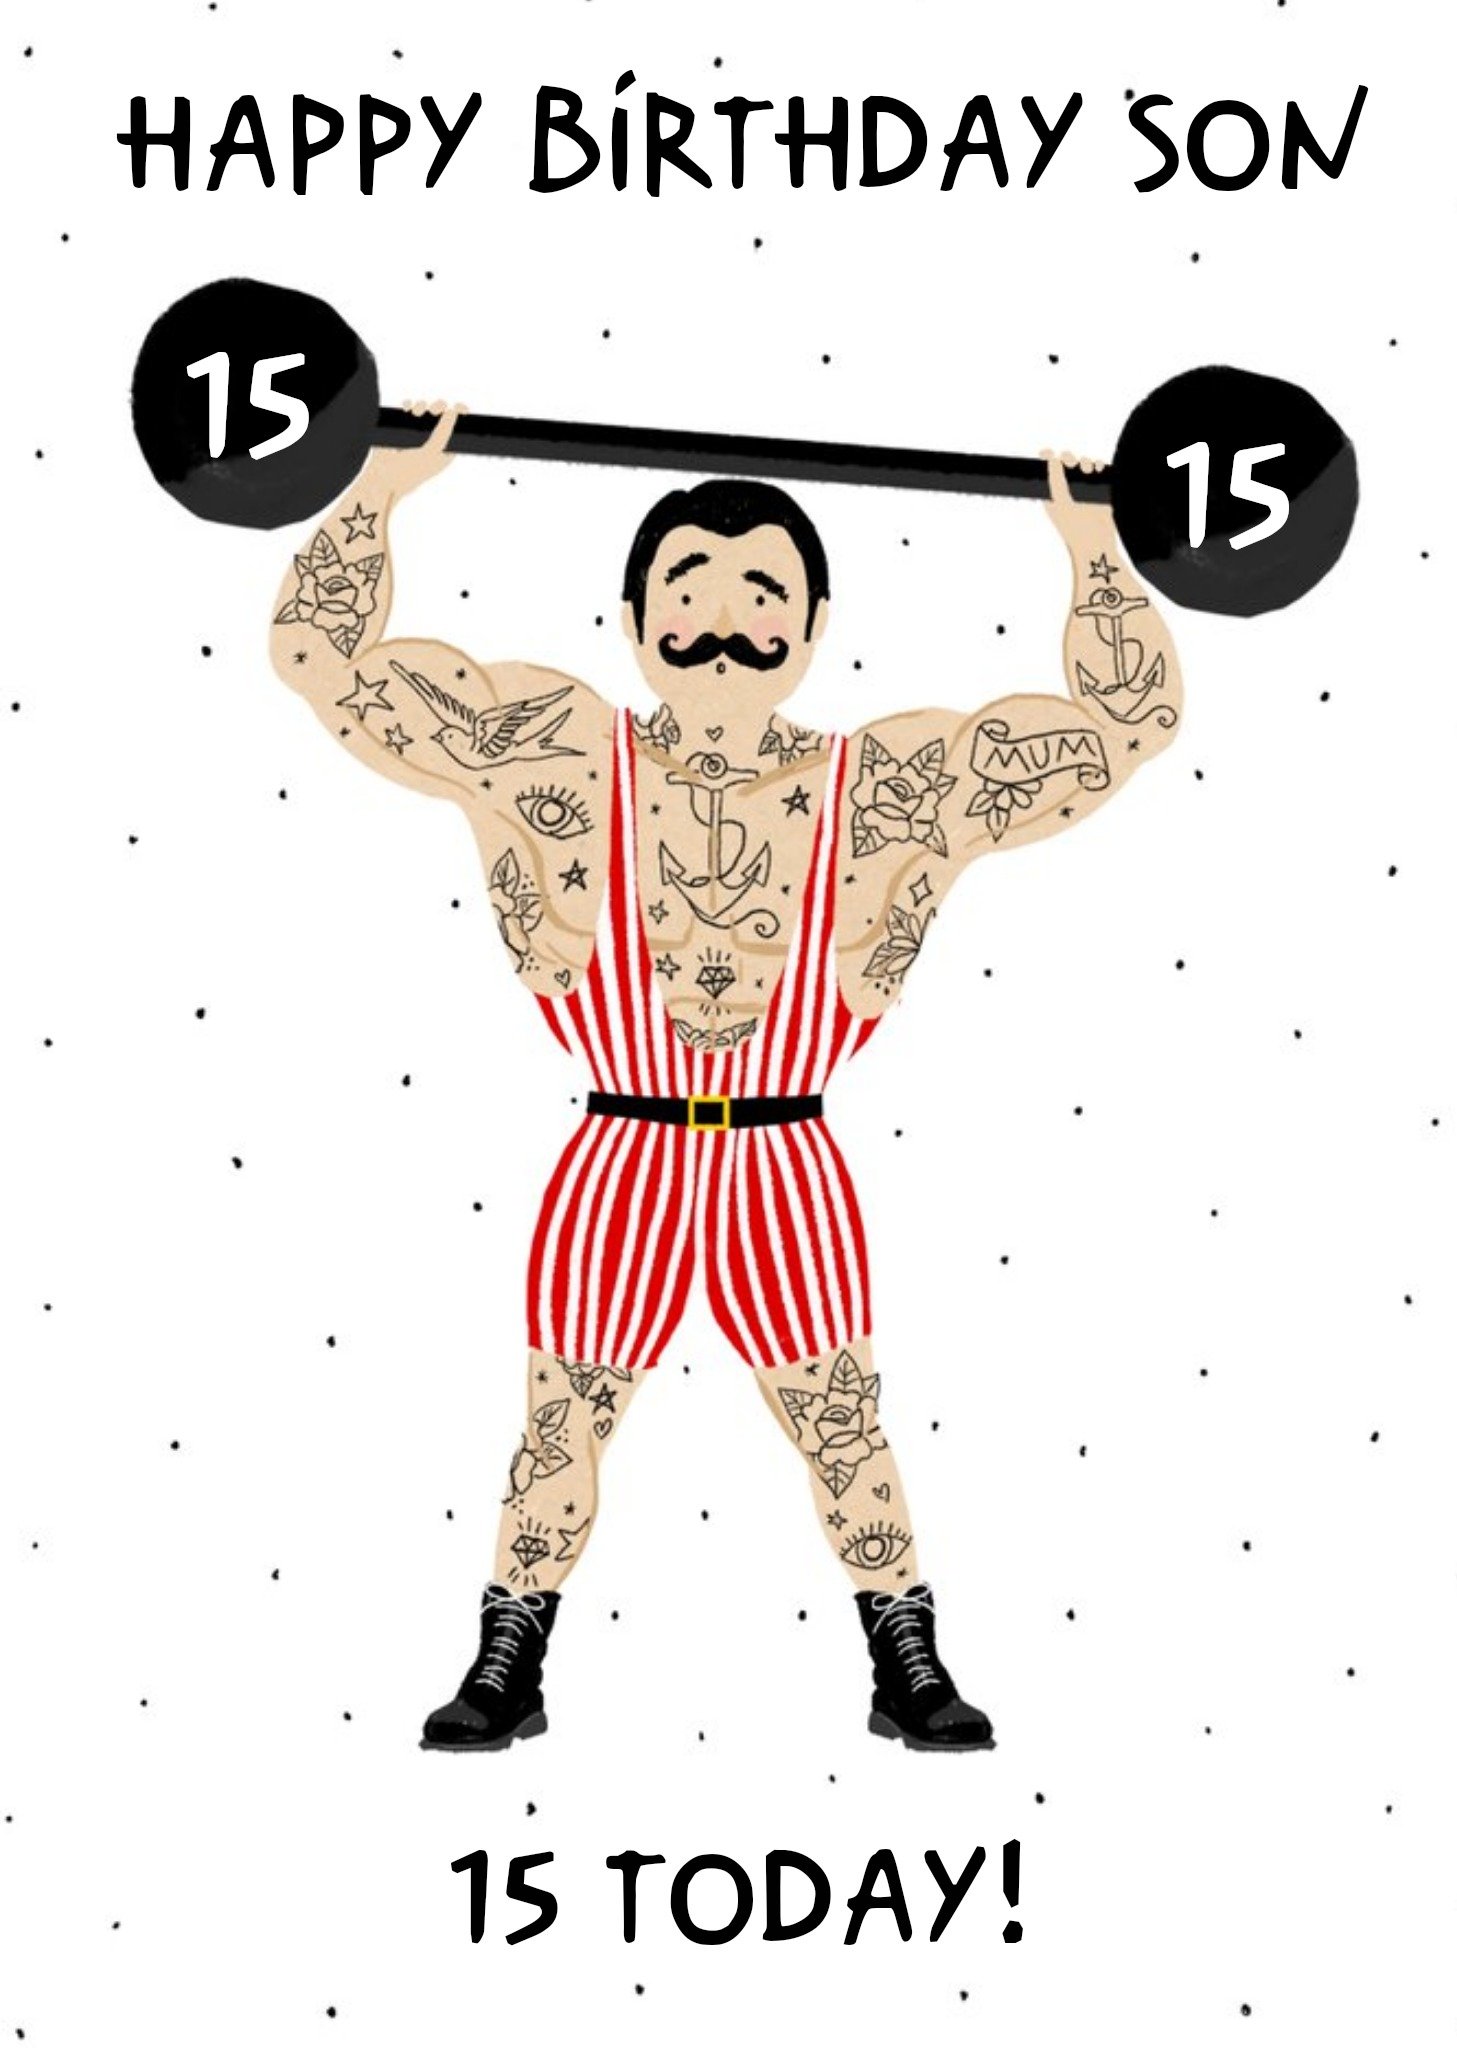 Moonpig Circus Strongman Illustrated15th Son Birthday Card By Okey Dokey Design, Large